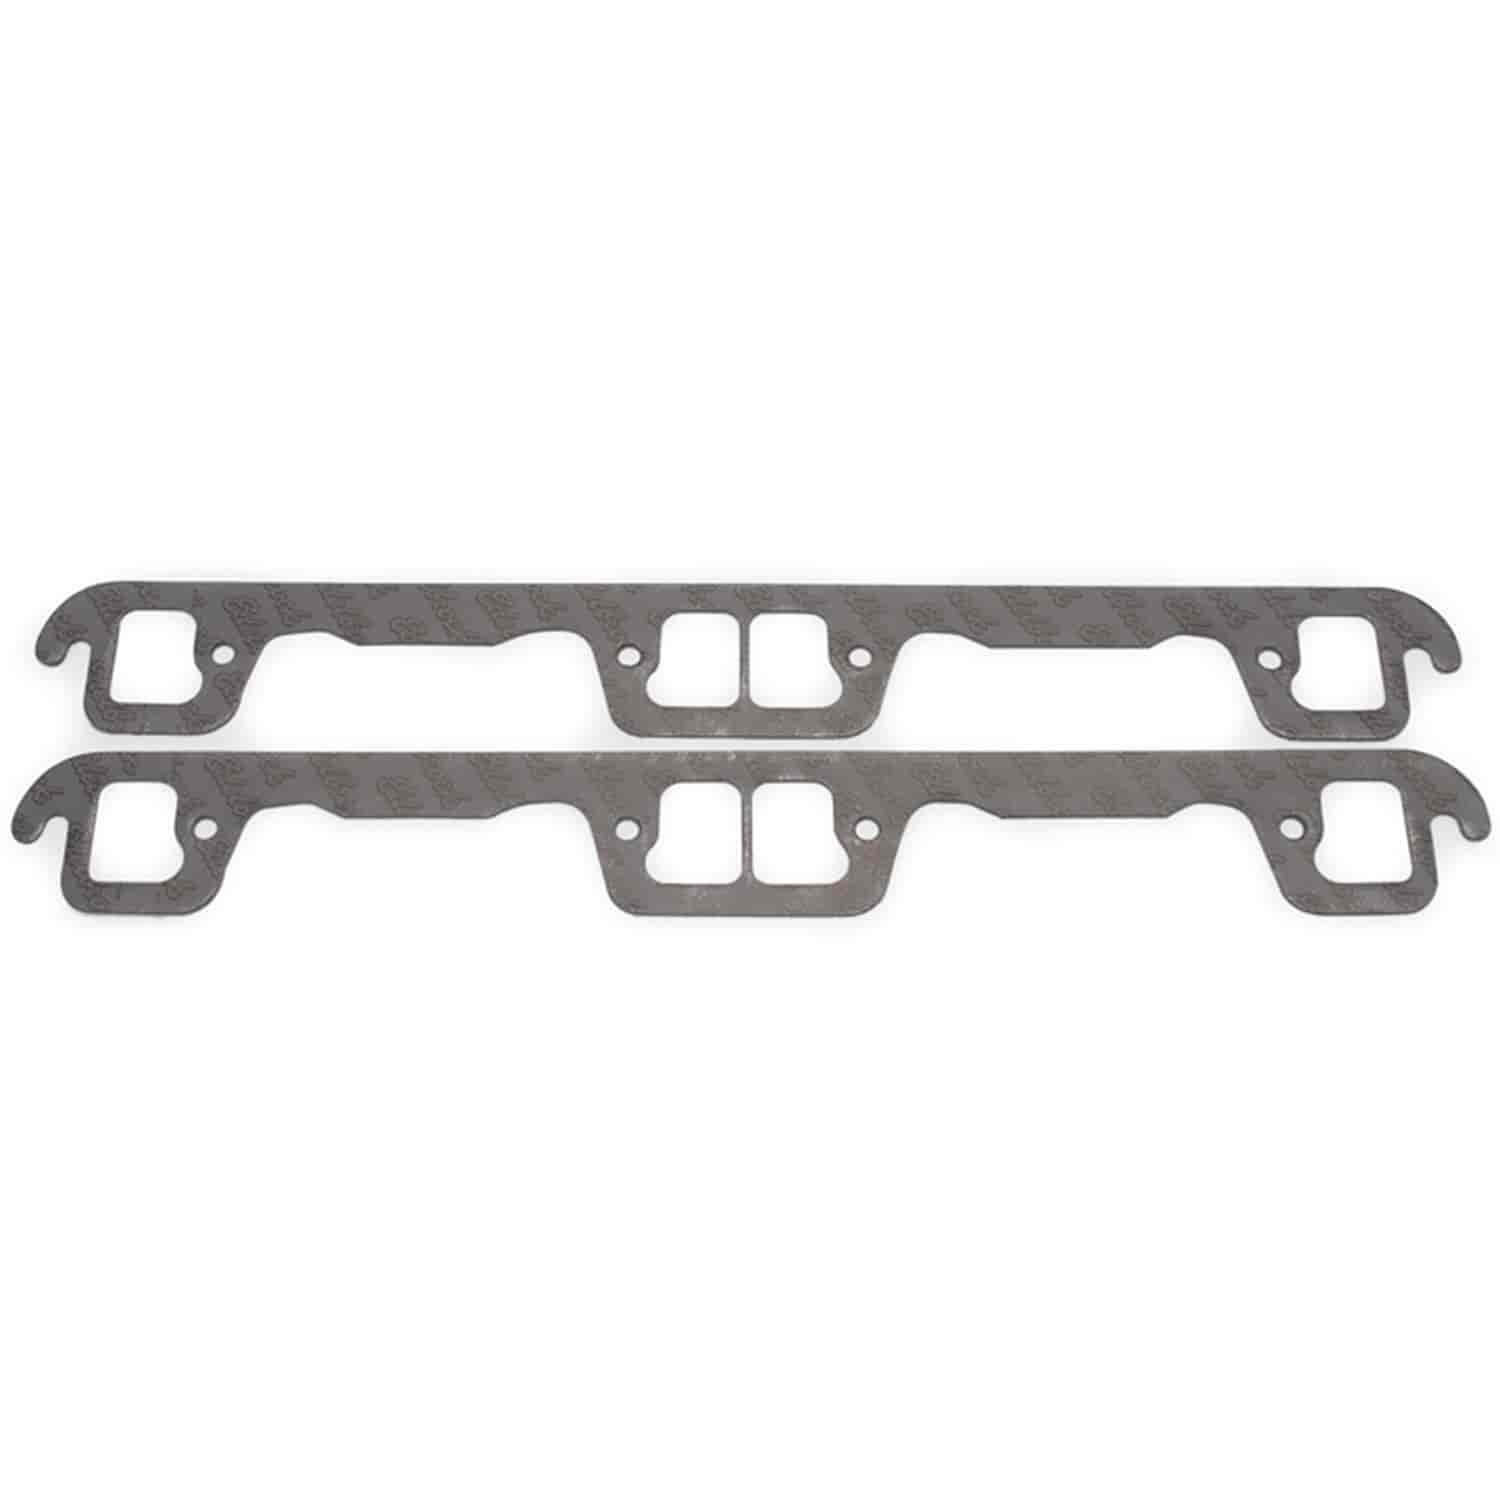 Exhaust Gaskets for AMC 290-401 V8